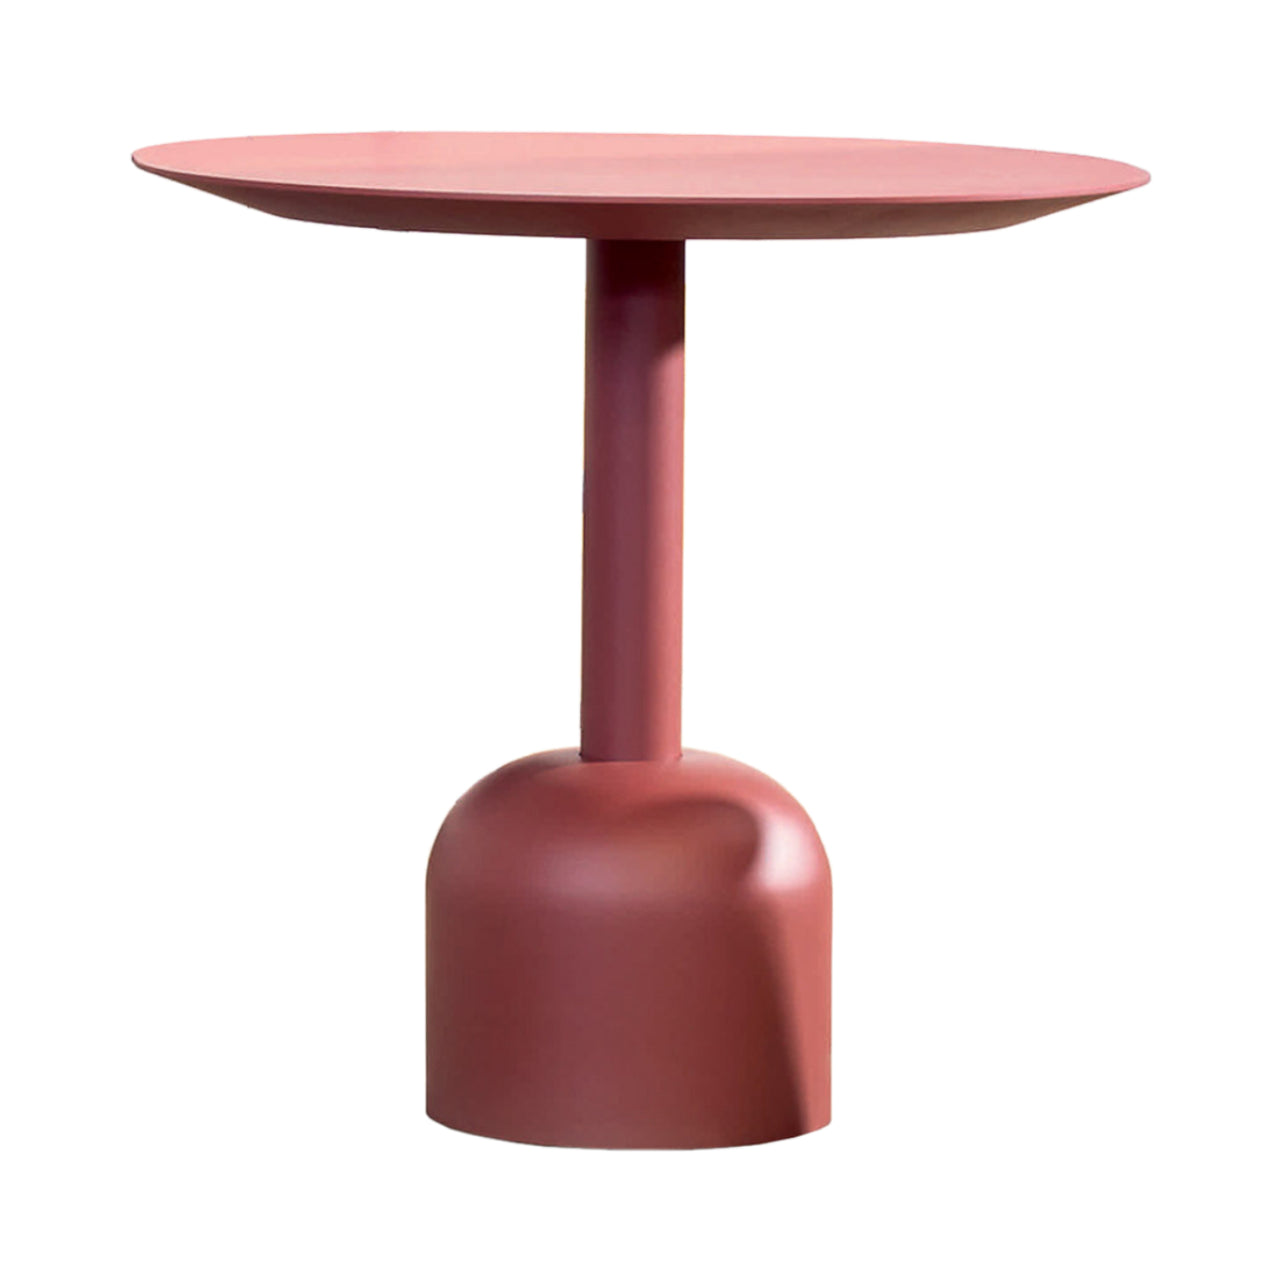 Illo Small Round Dining Table: Lacquered Pompei + Lacquered Pompei + Lacquered Pompei